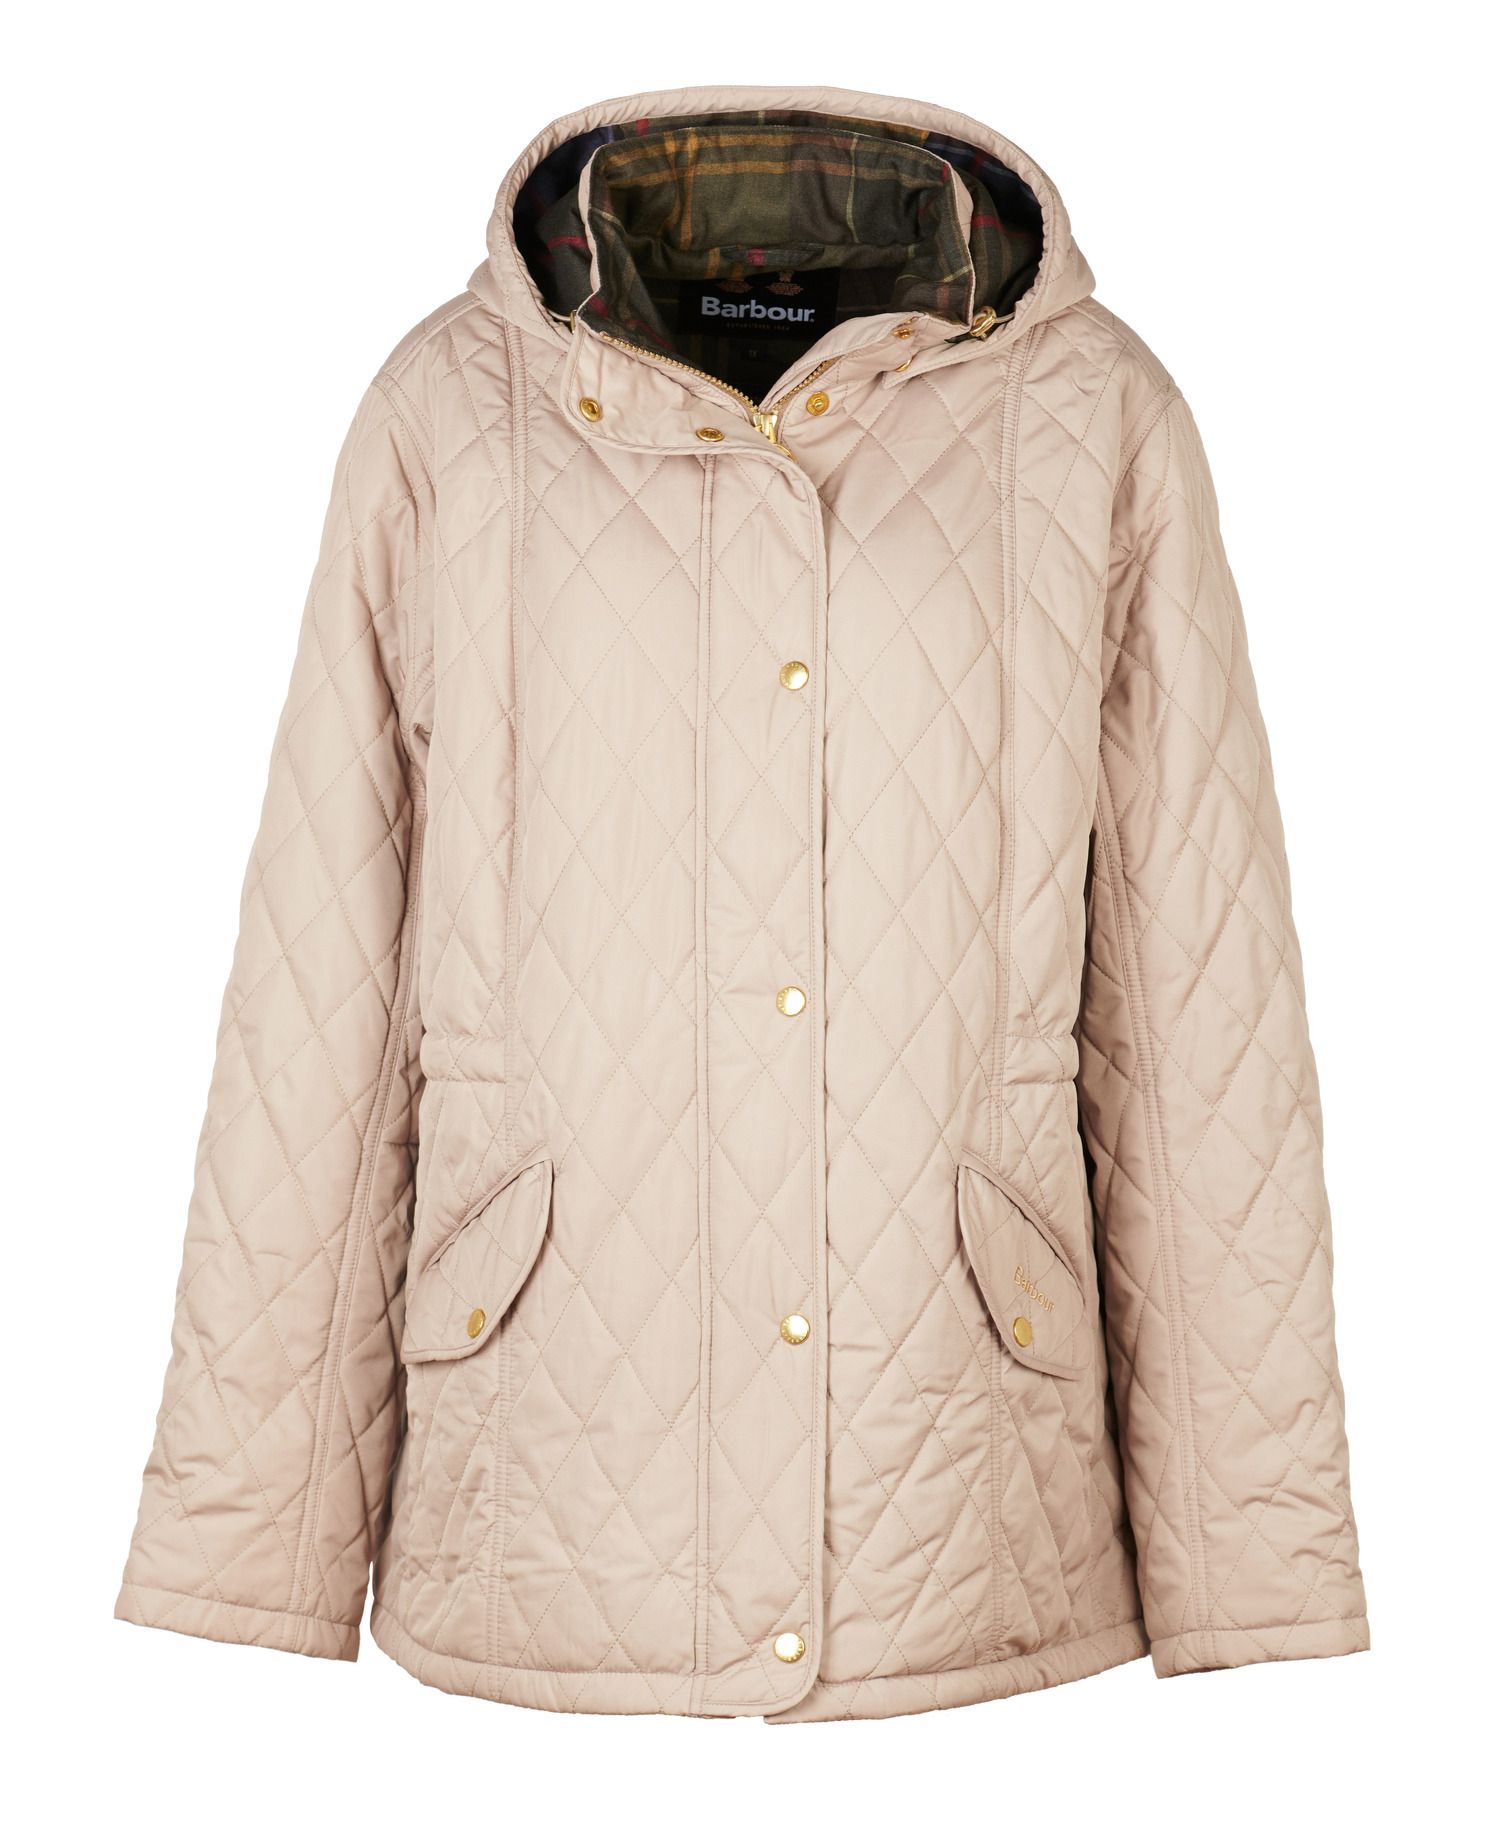 Shop the Barbour Millfire Plus Size Quilted Jacket today. | Barbour